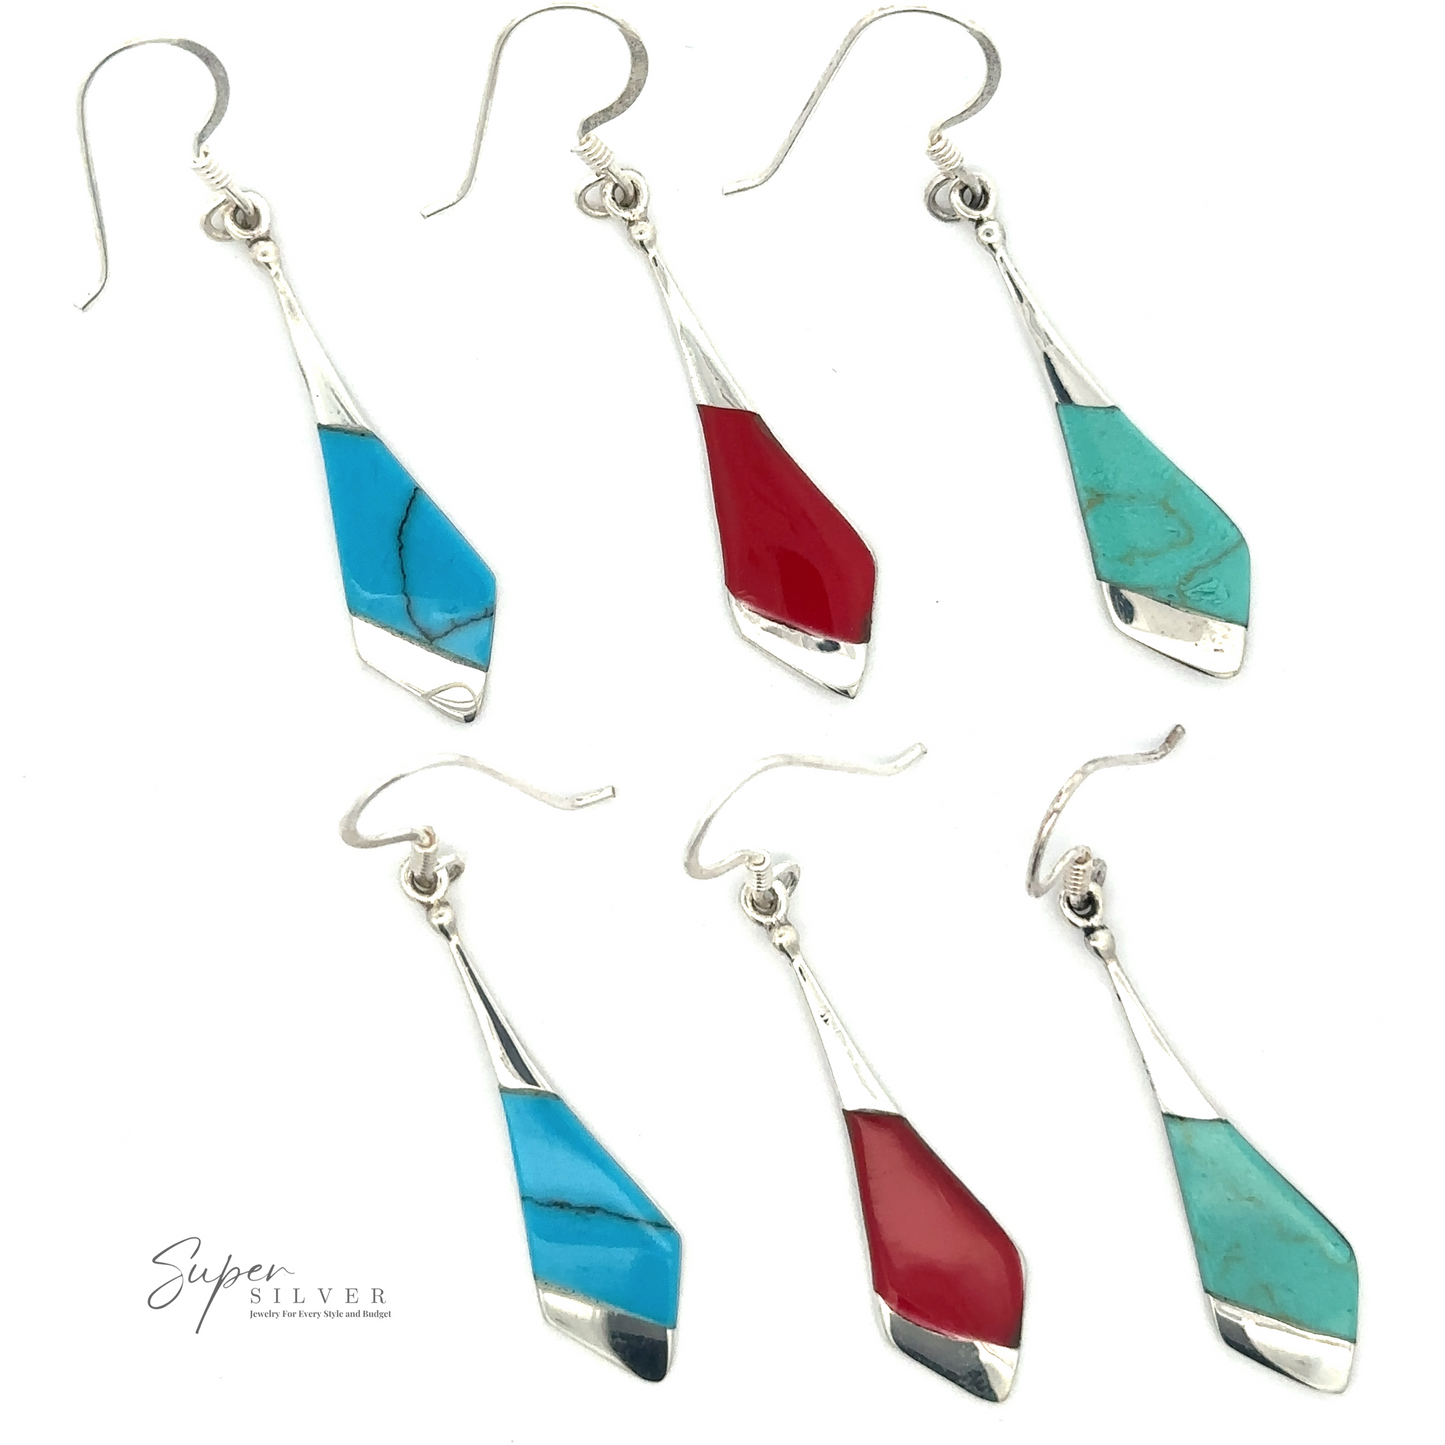 A set of six Inlaid Tie-Shaped Earrings with geometric designs in red, blue, and turquoise colors, featuring beautiful reconstituted coral elements. The brand "Super Silver" is visible in the bottom-left corner.